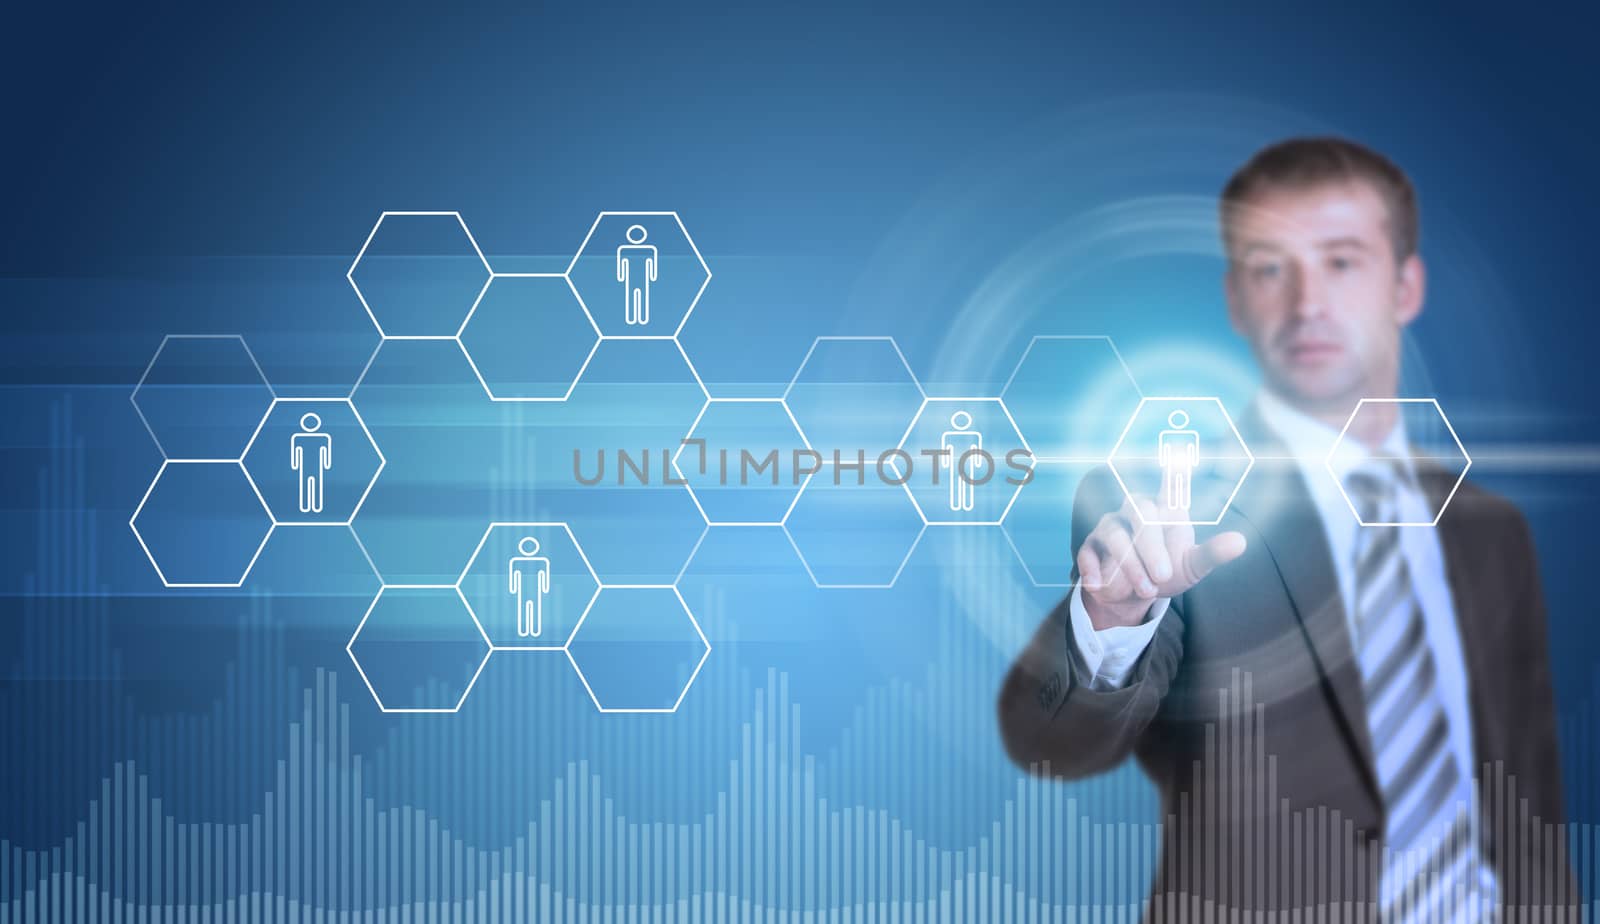 Businessman in suit finger presses virtual button. Transparent hexagons, glow circles and graphs as backdrop